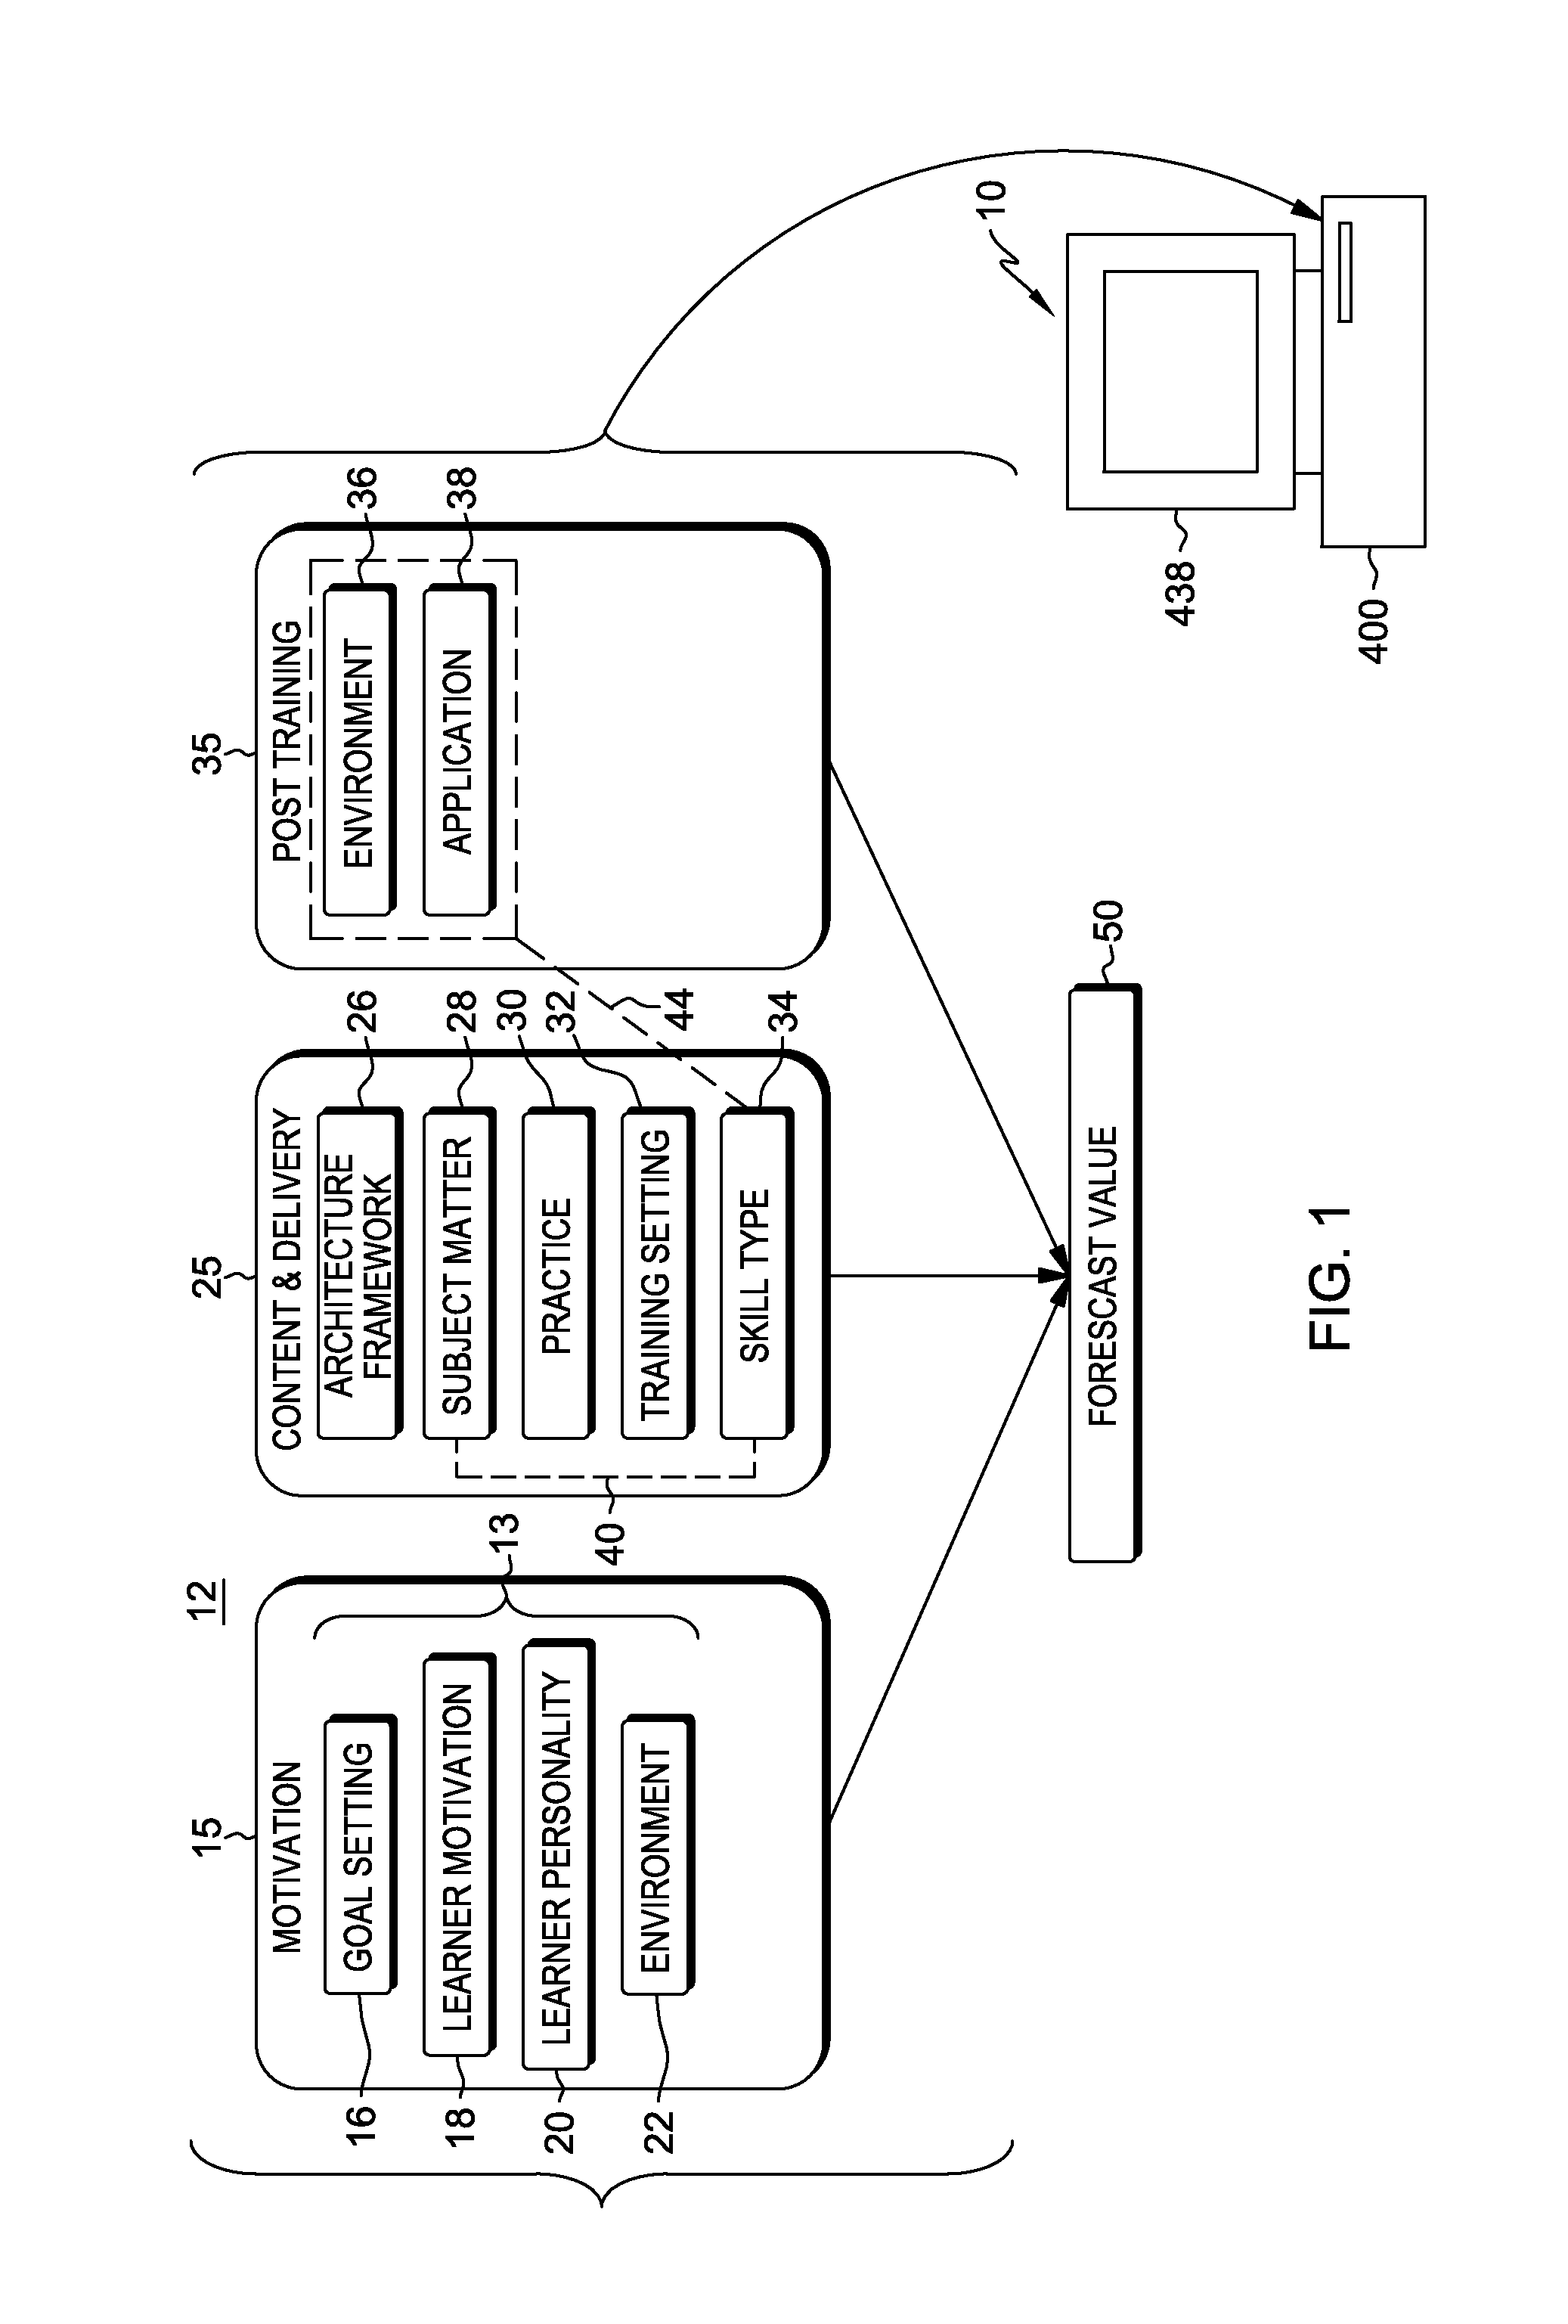 Learner enablement forecast system and method